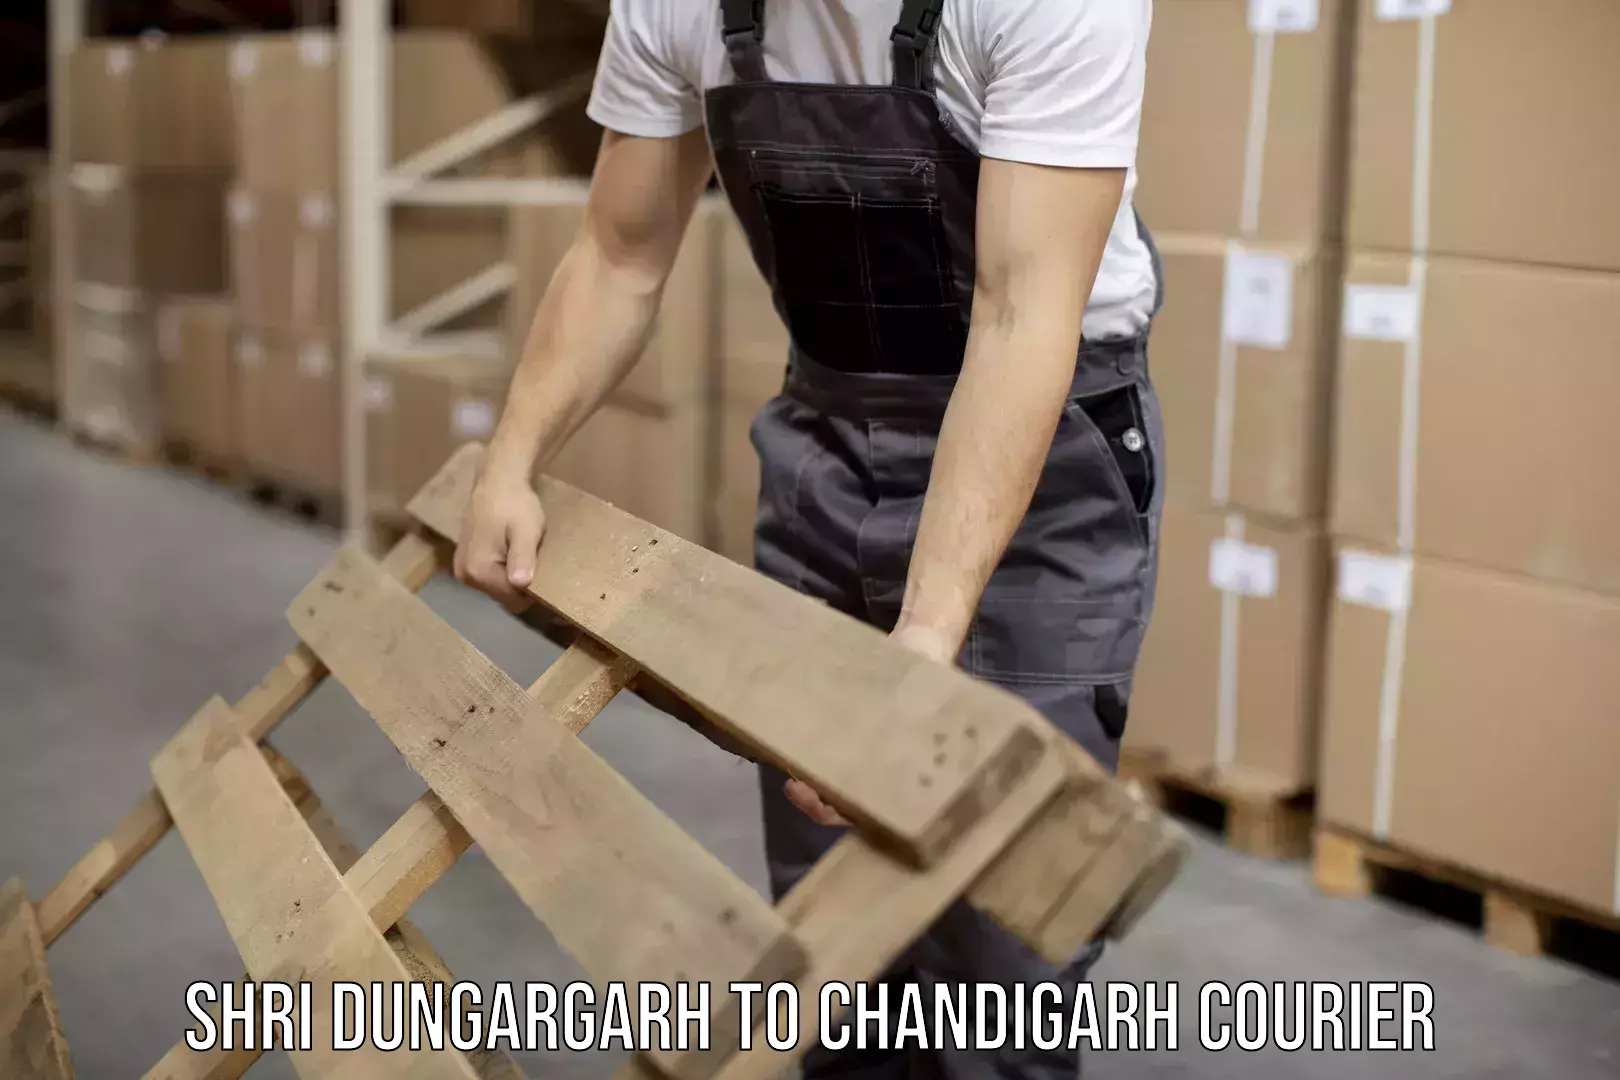 Package delivery network Shri Dungargarh to Chandigarh